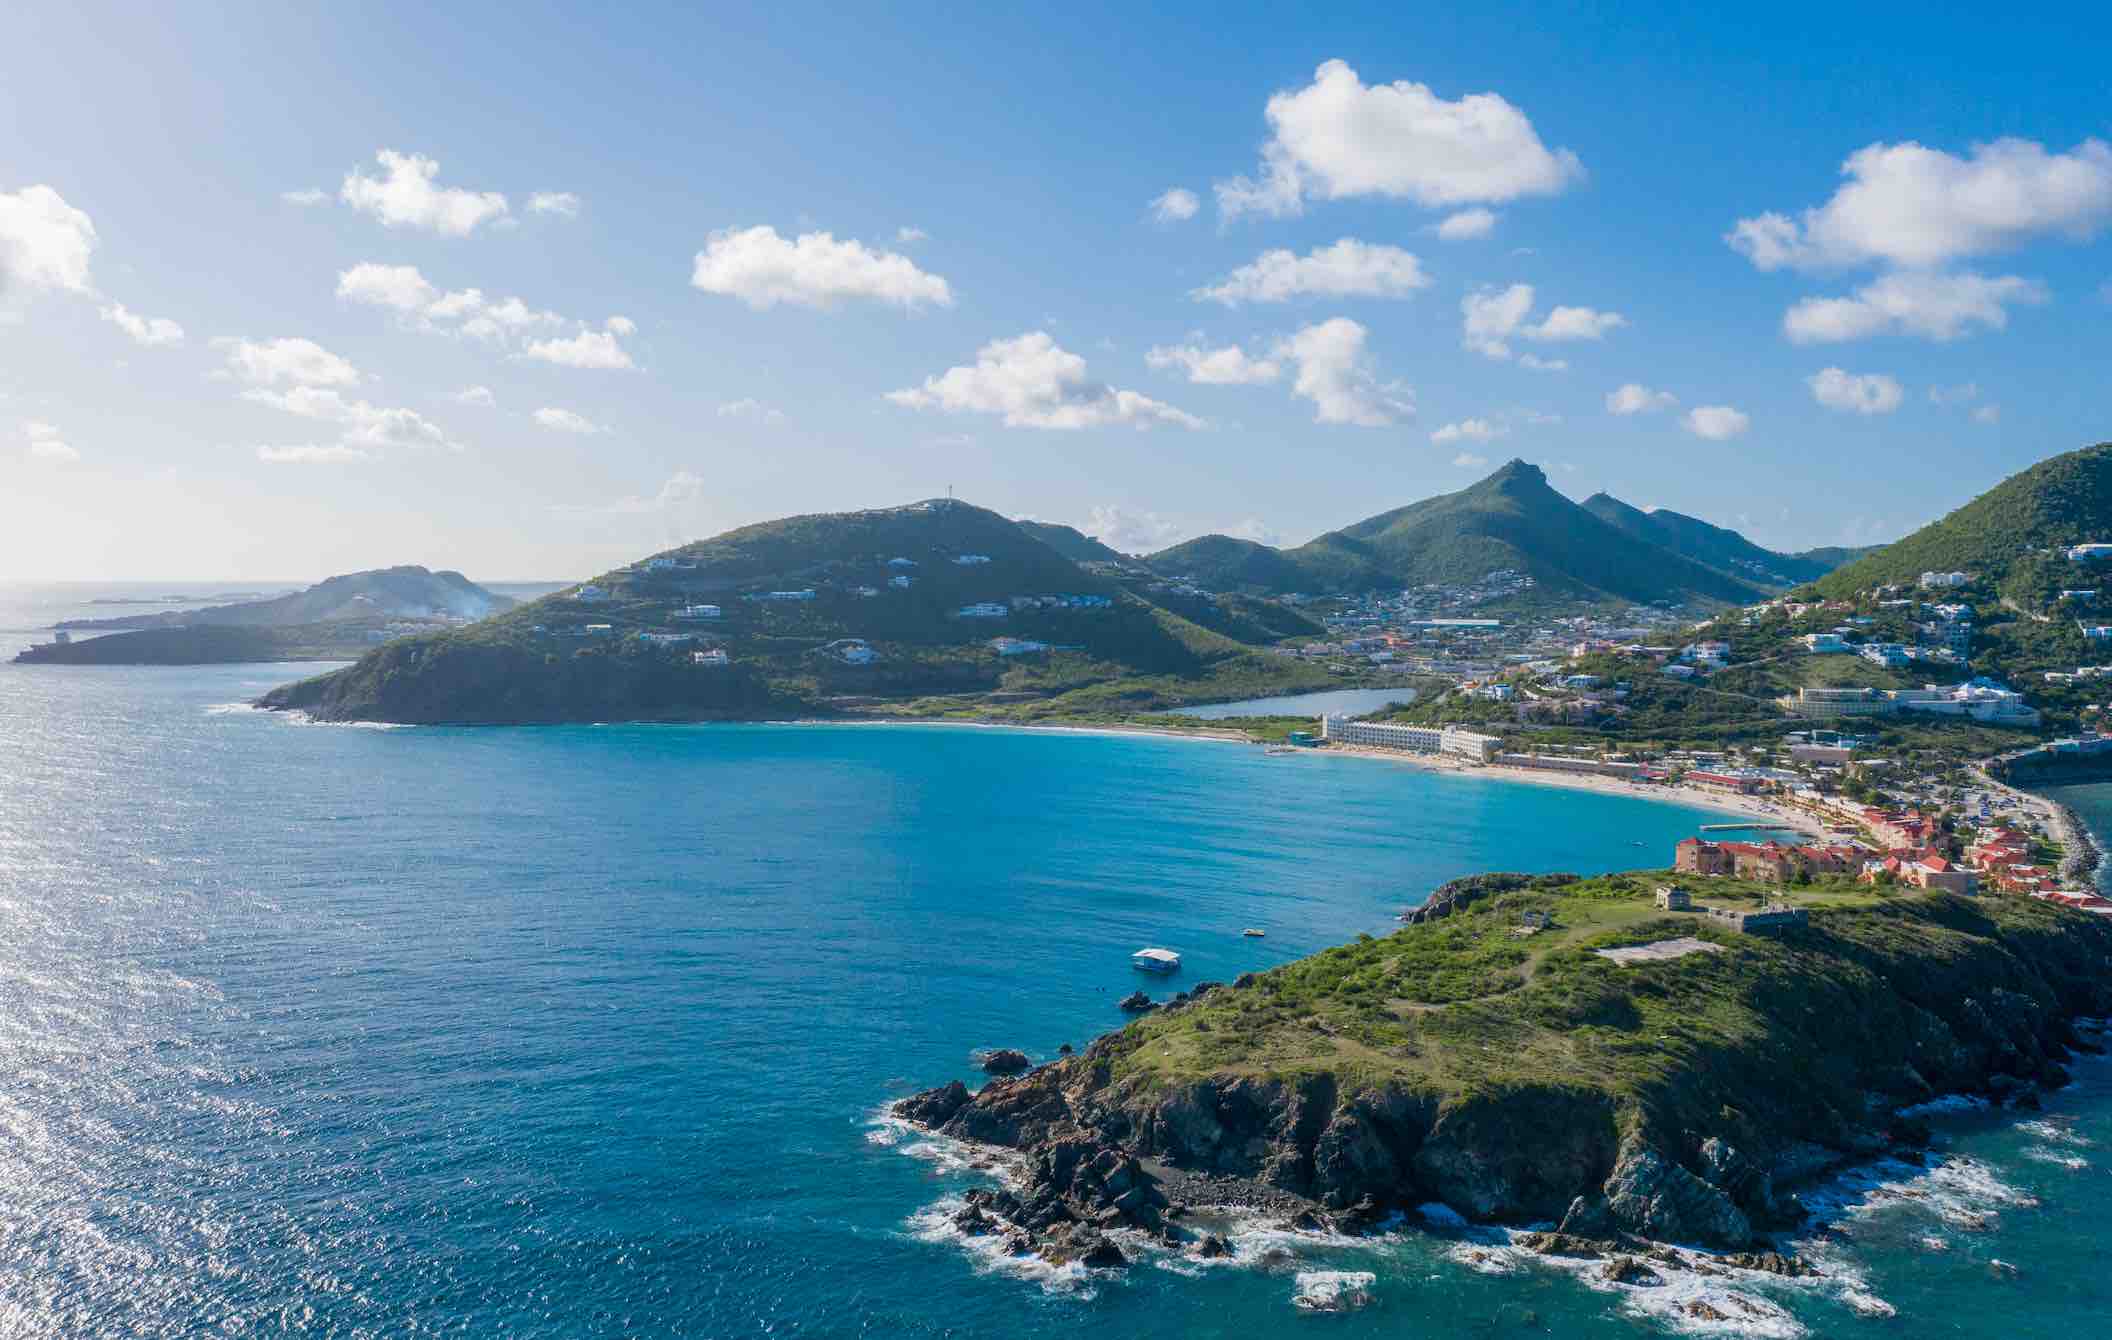 the beautiful island of St. Maarten/ St. Martin with blue sea and sky and green mountainous island dotted with houses.